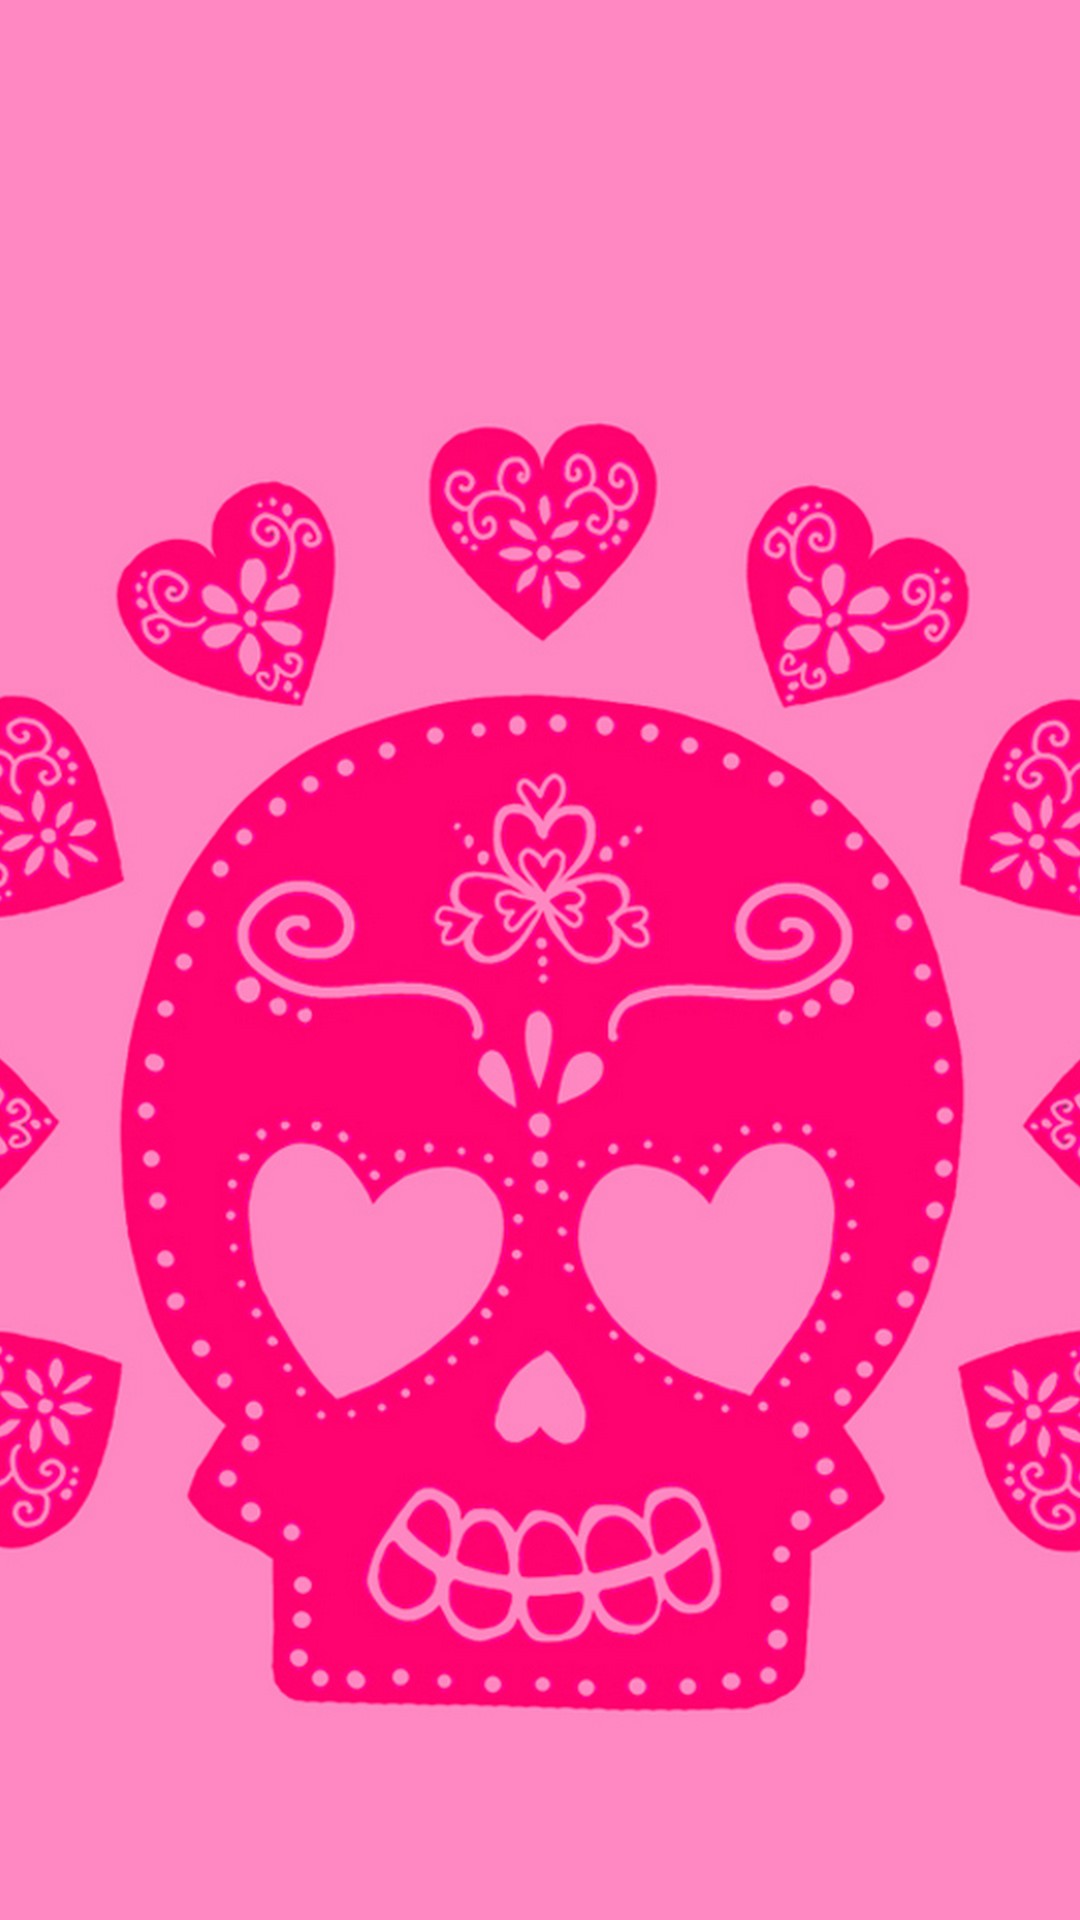 Skull Cute Girly Wallpaper Android 1080x1920